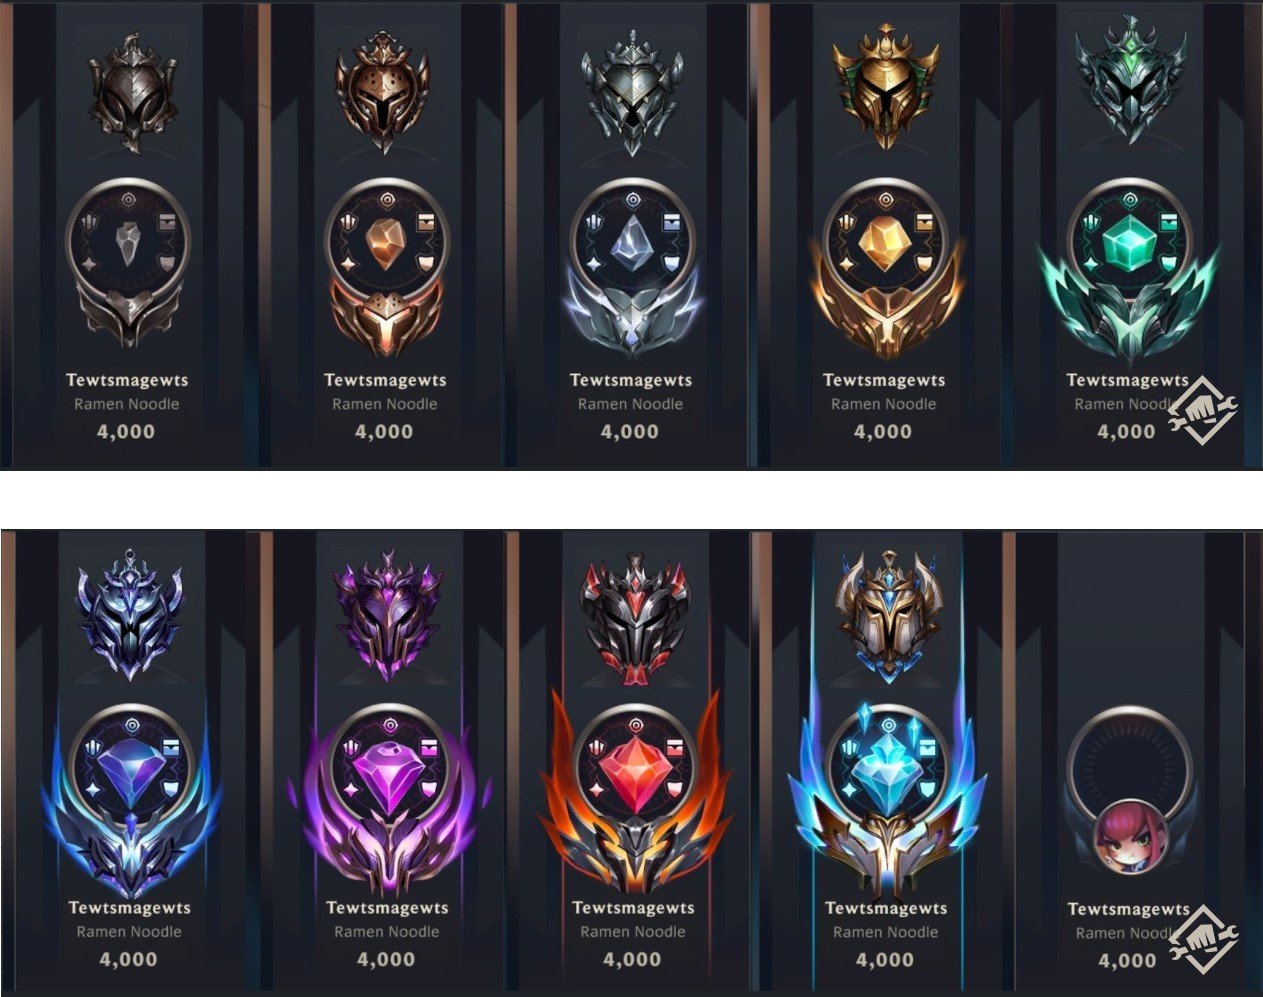 Rodzeństwa W League Of Legends LoL: Upcoming changes to the Rank Emblems and Regalia - Millenium